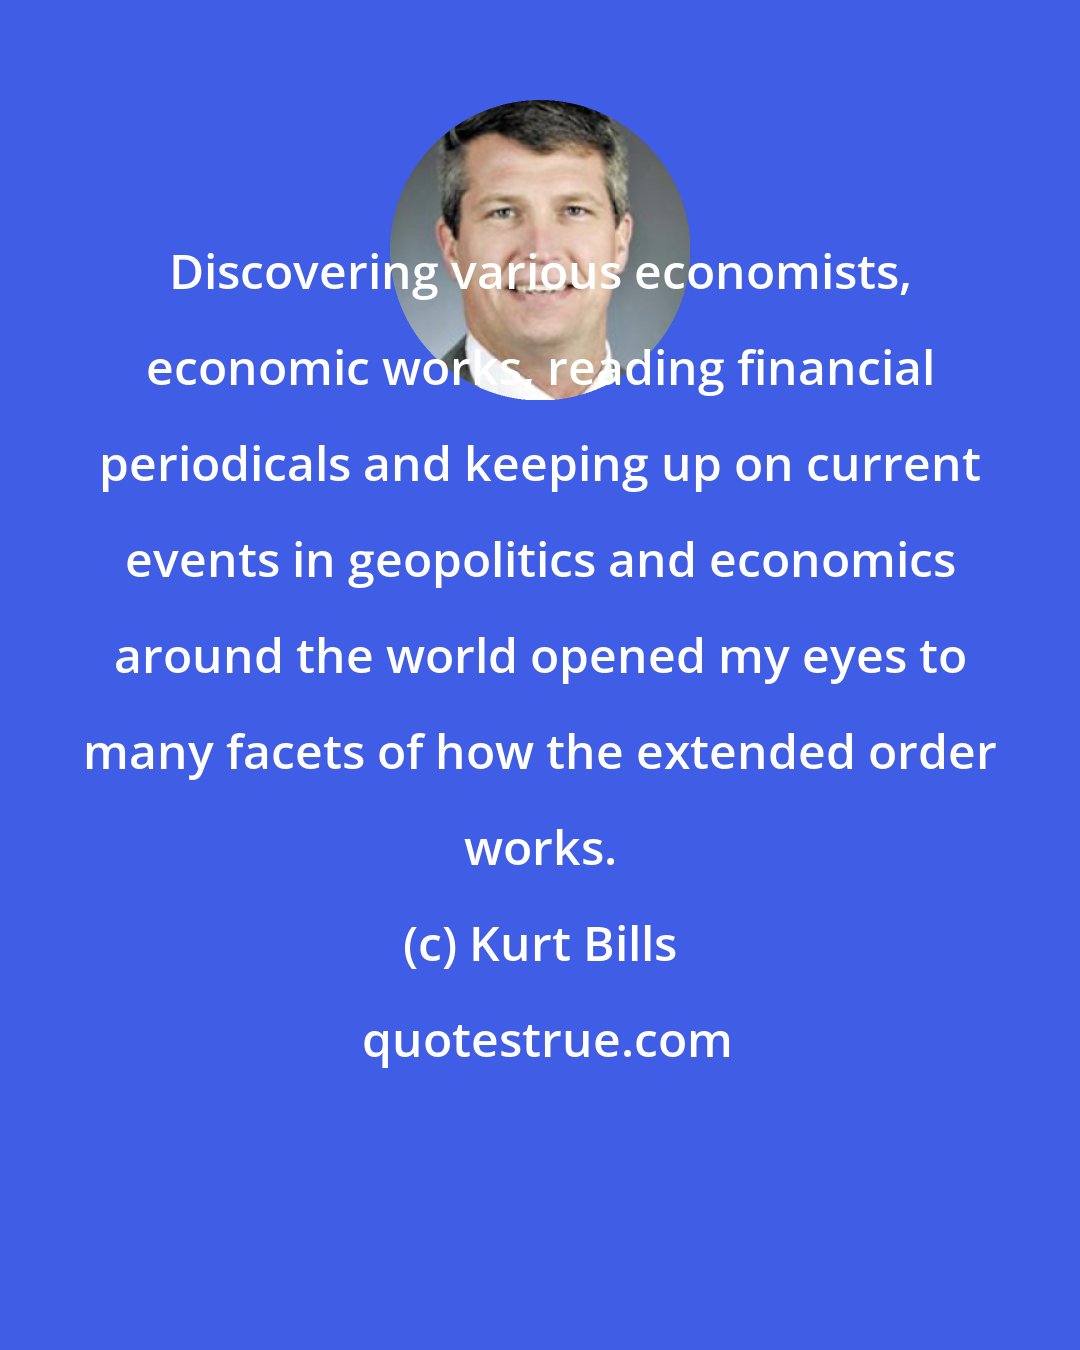 Kurt Bills: Discovering various economists, economic works, reading financial periodicals and keeping up on current events in geopolitics and economics around the world opened my eyes to many facets of how the extended order works.